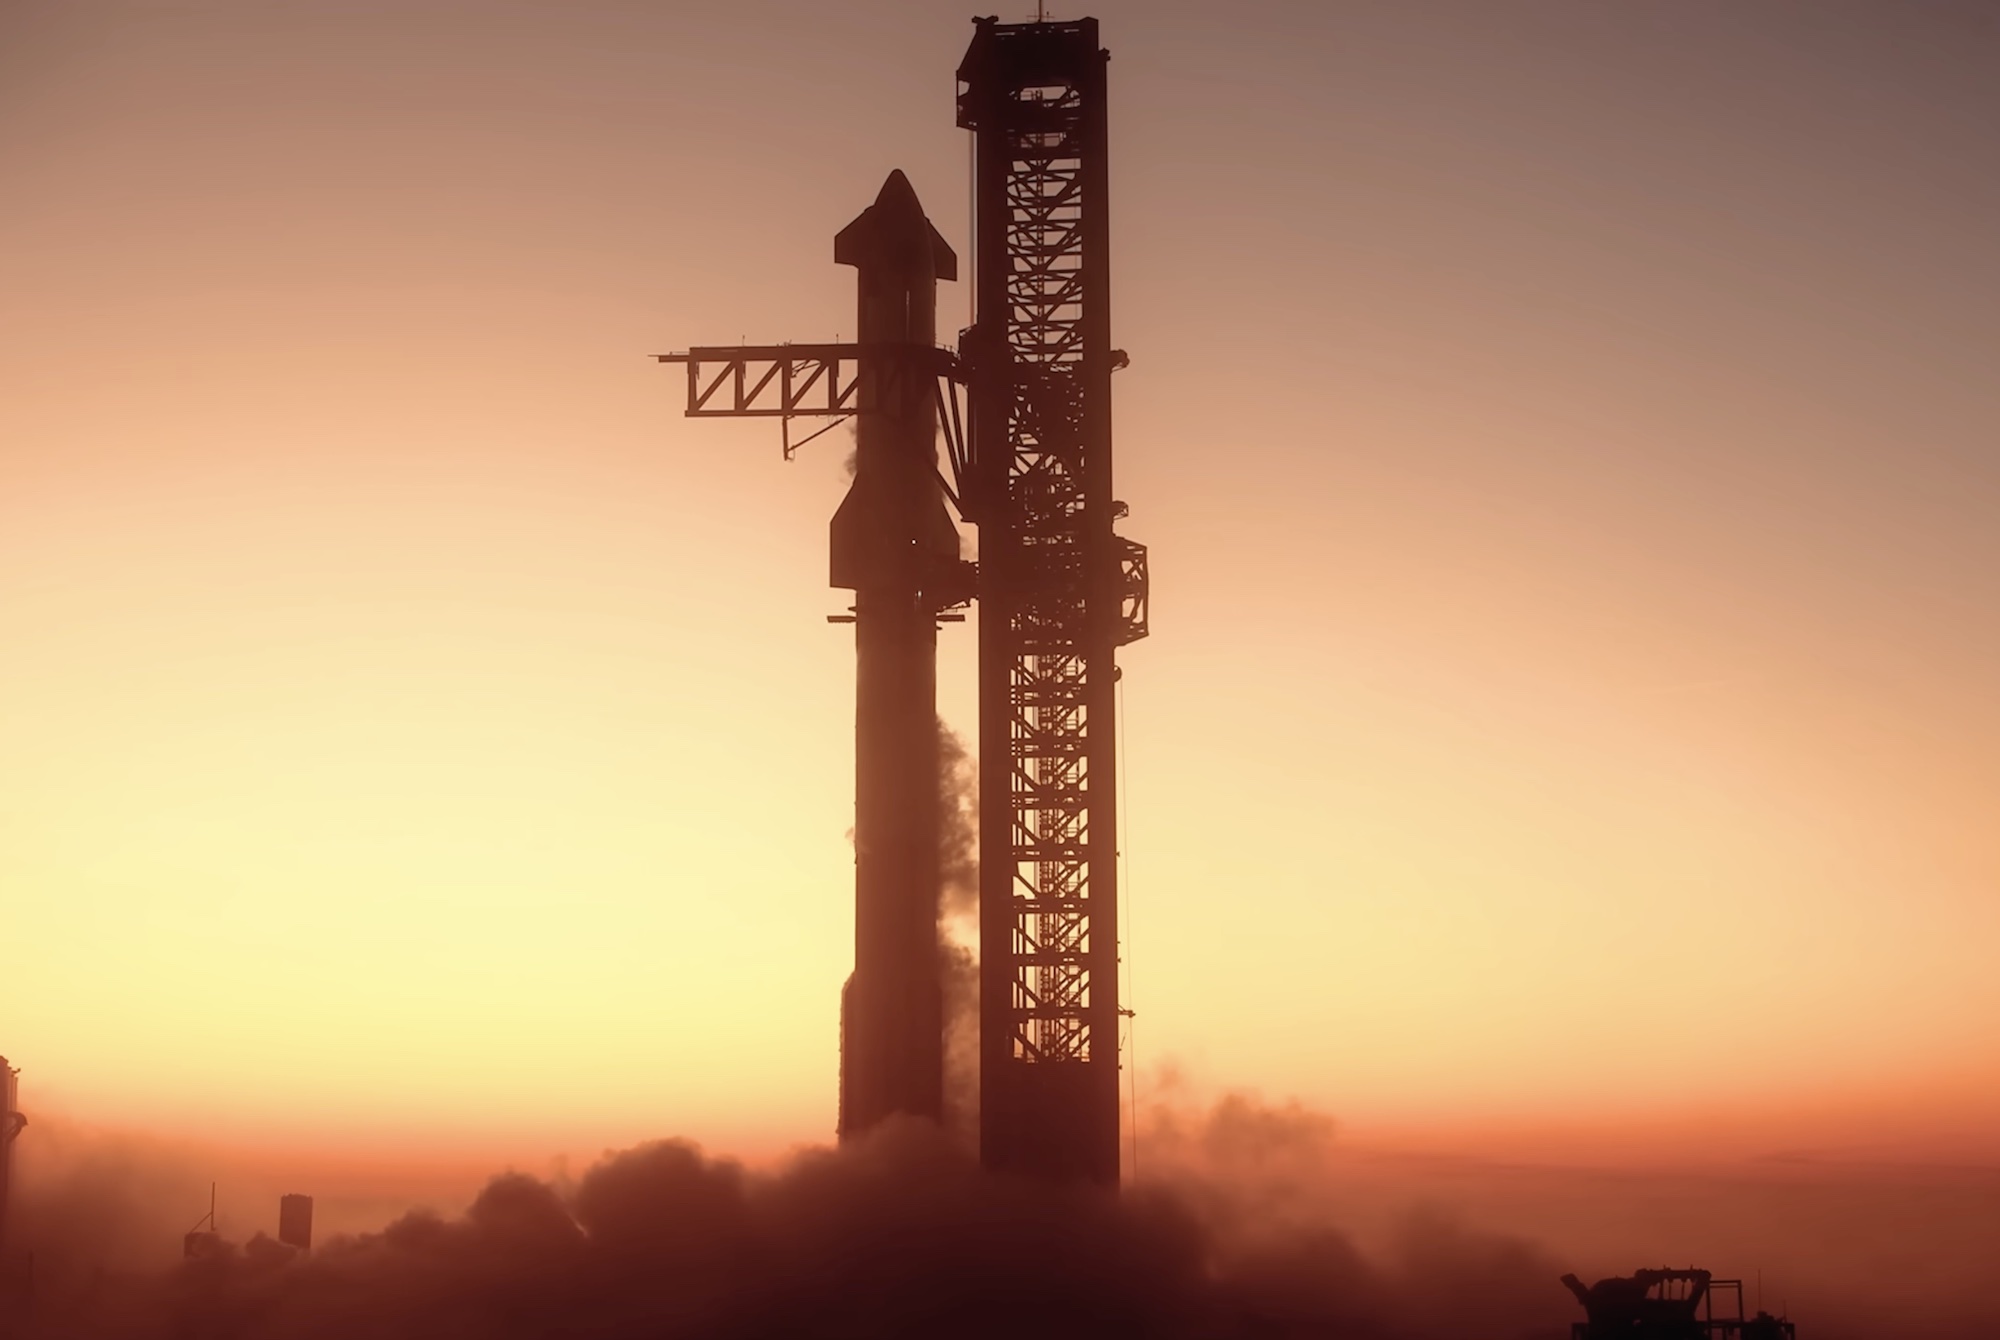 The world's most powerful rocket on the launchpad.